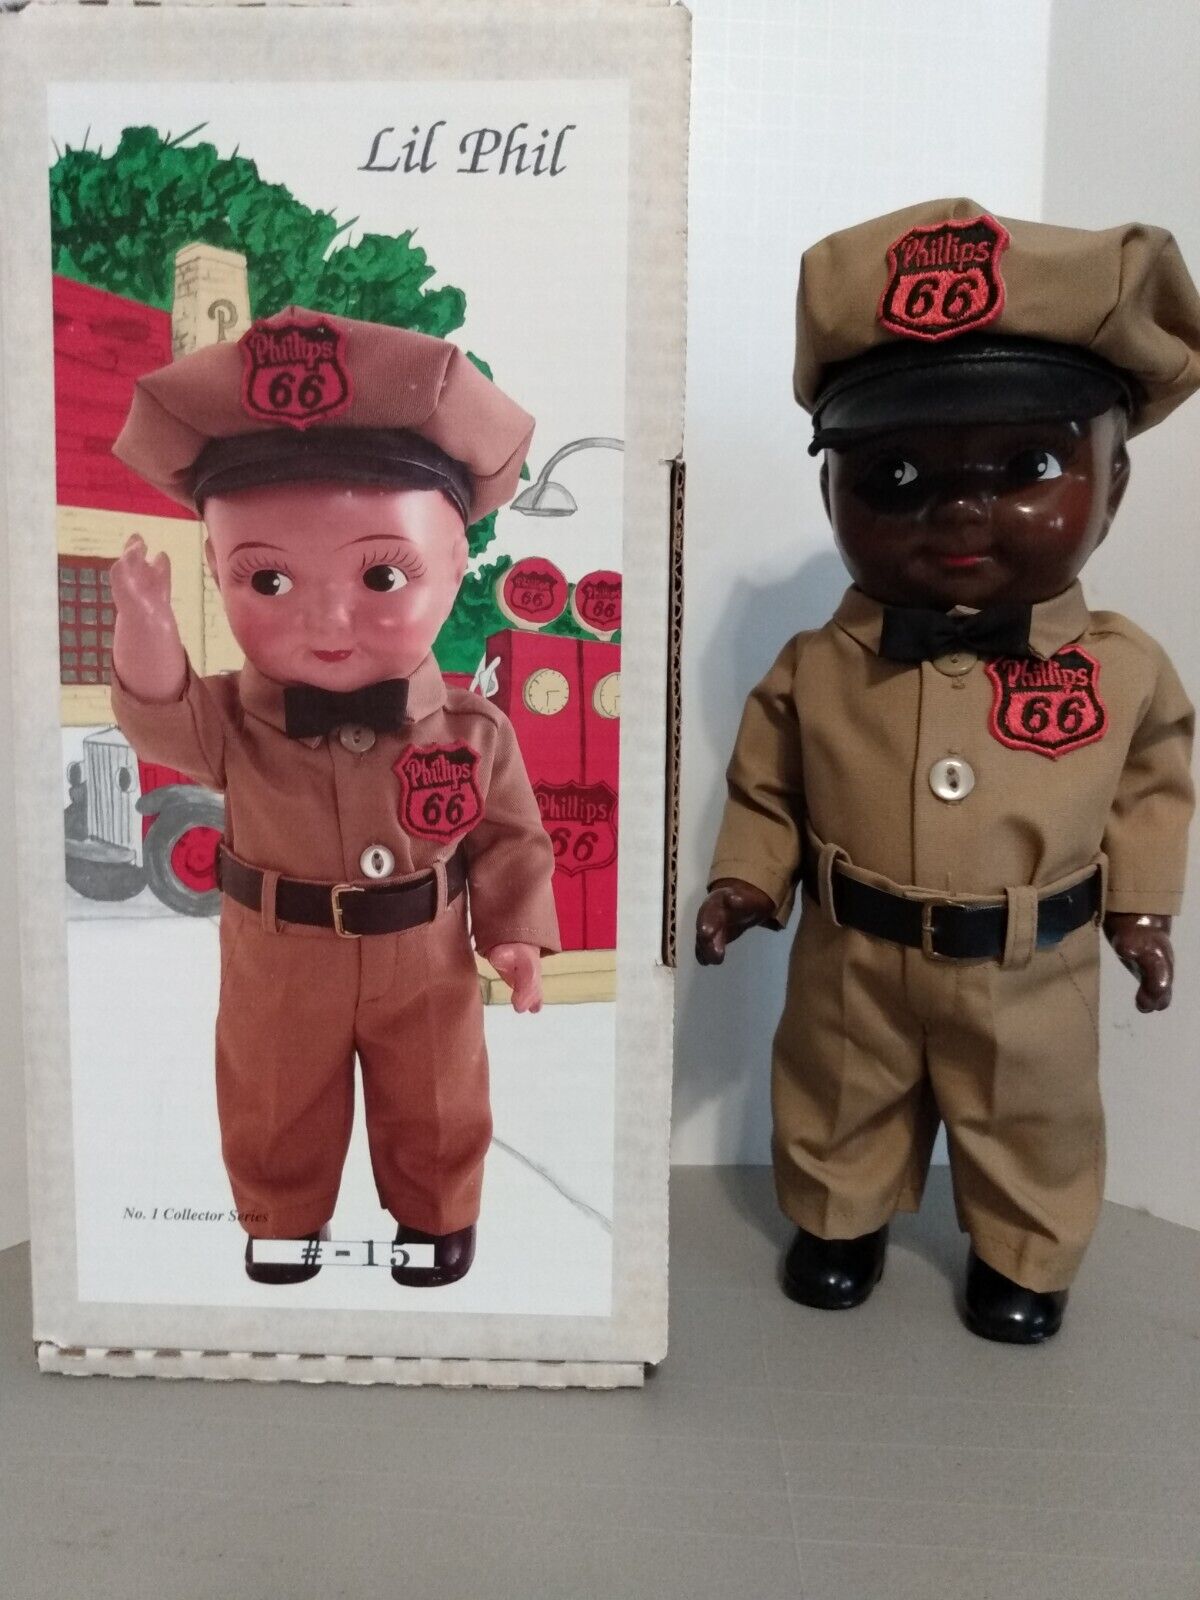 Rare Black Lil\' Phil Gas Station Attendant NOS- #15 of 48 (Ames Doll)